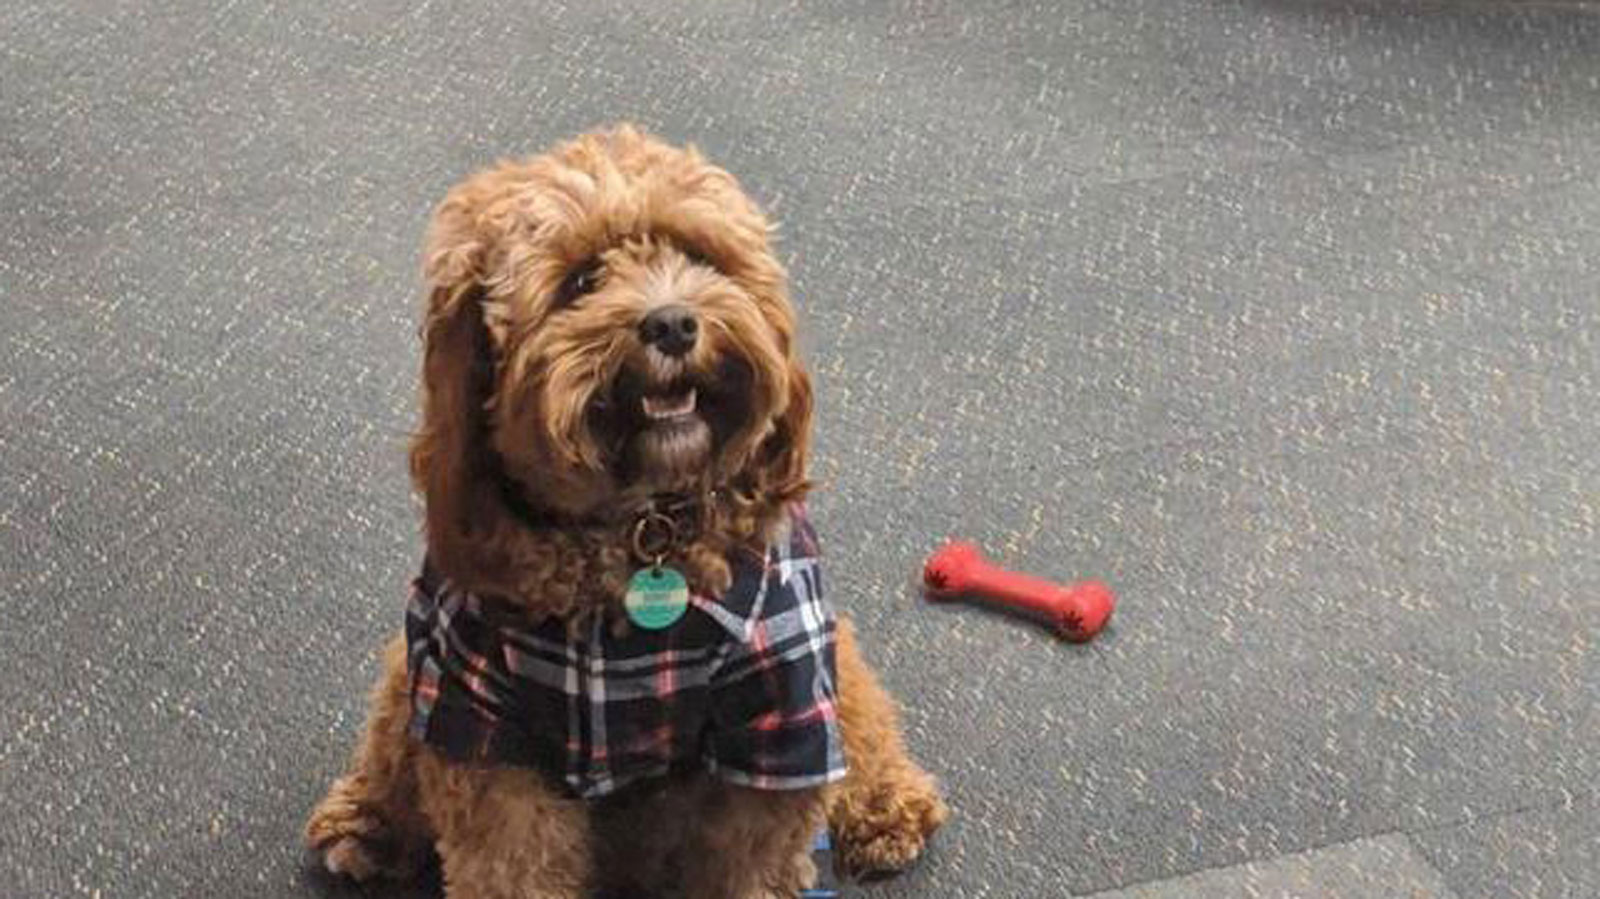 Bobby the cavoodle at Student Central